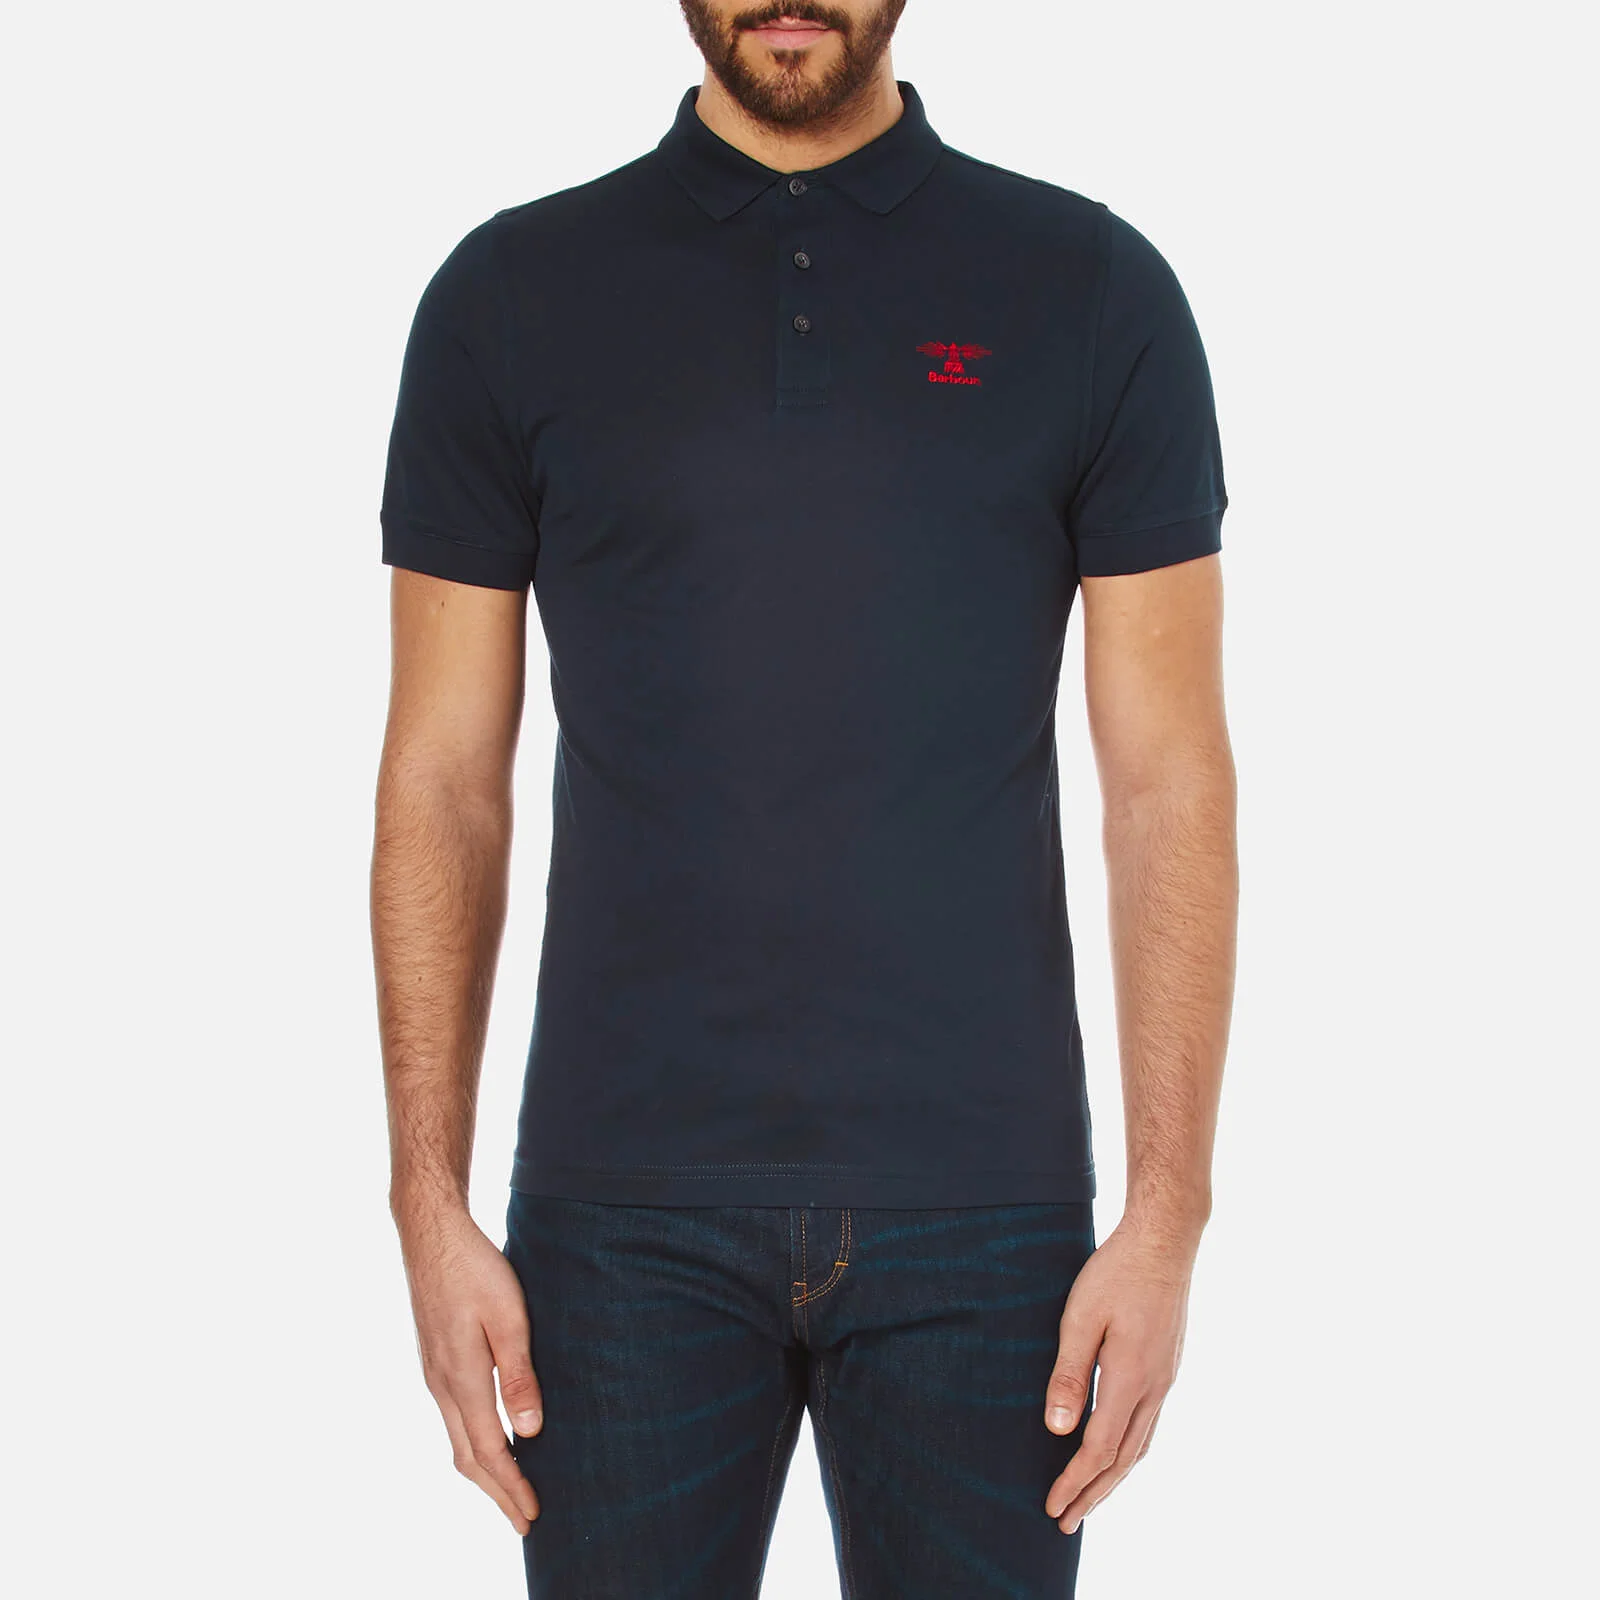 Barbour Heritage Men's Standards Polo Shirt - Navy Image 1